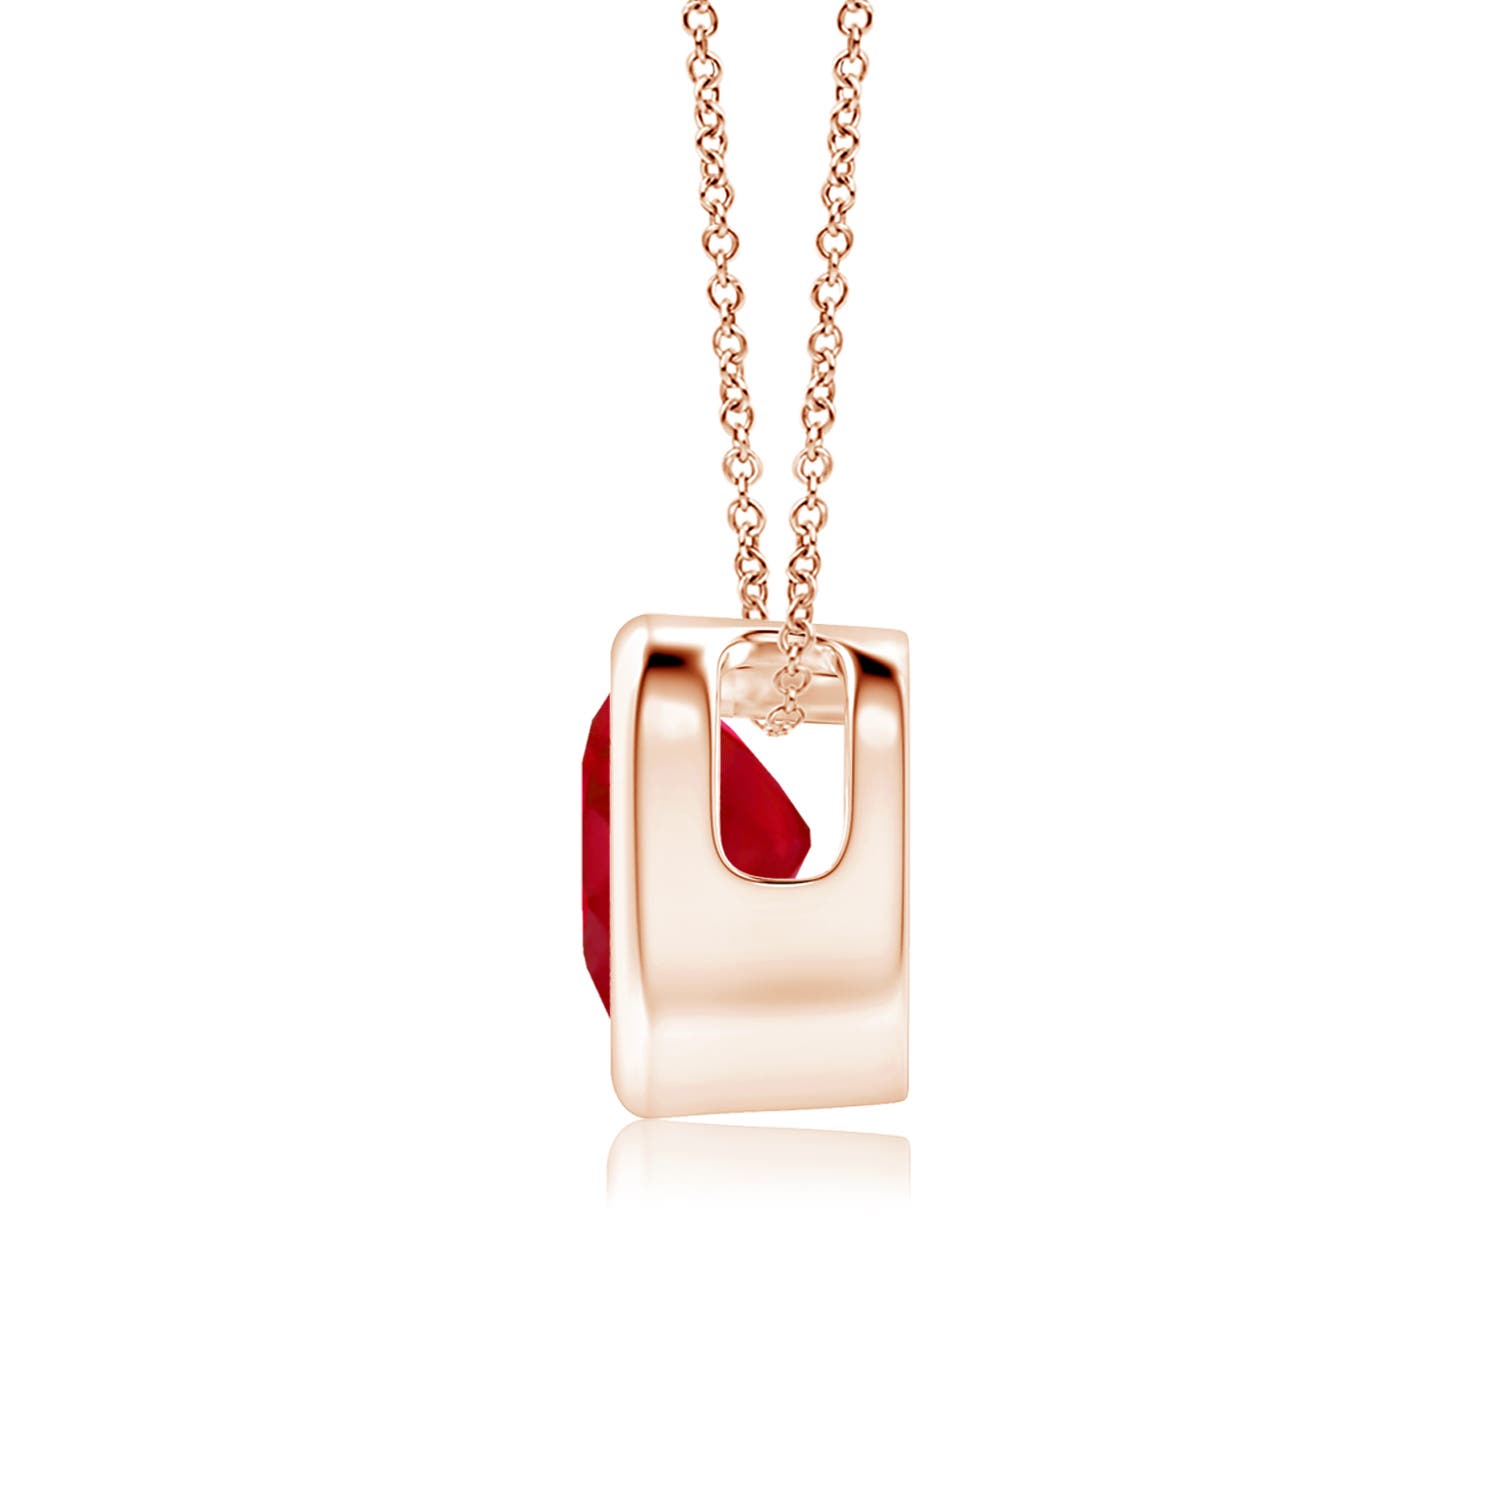 AA - Ruby / 0.55 CT / 14 KT Rose Gold